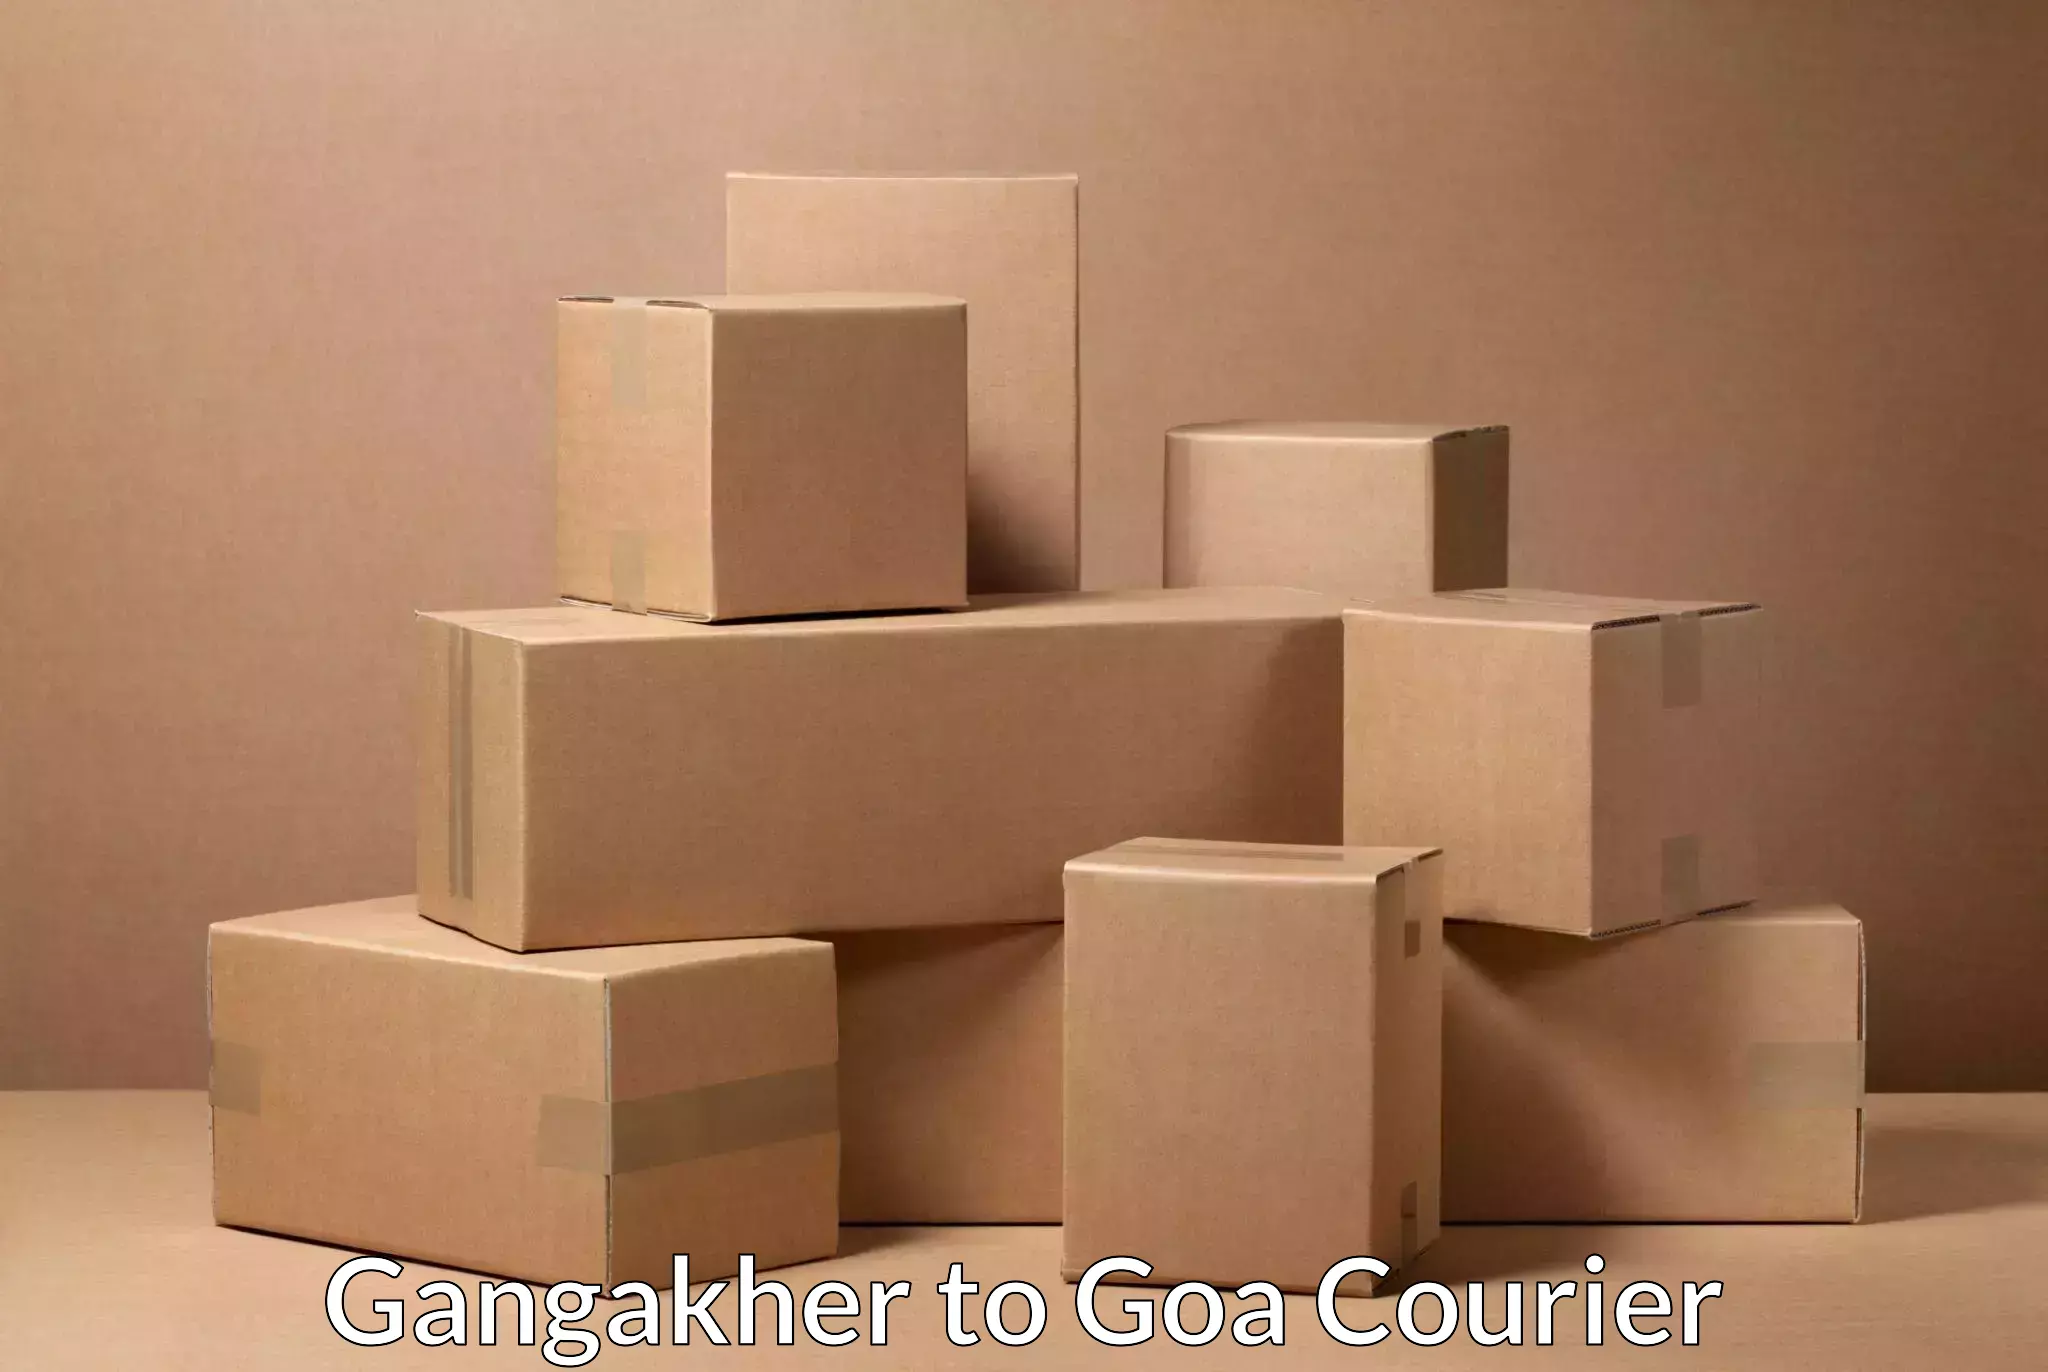 Multi-service courier options Gangakher to Goa